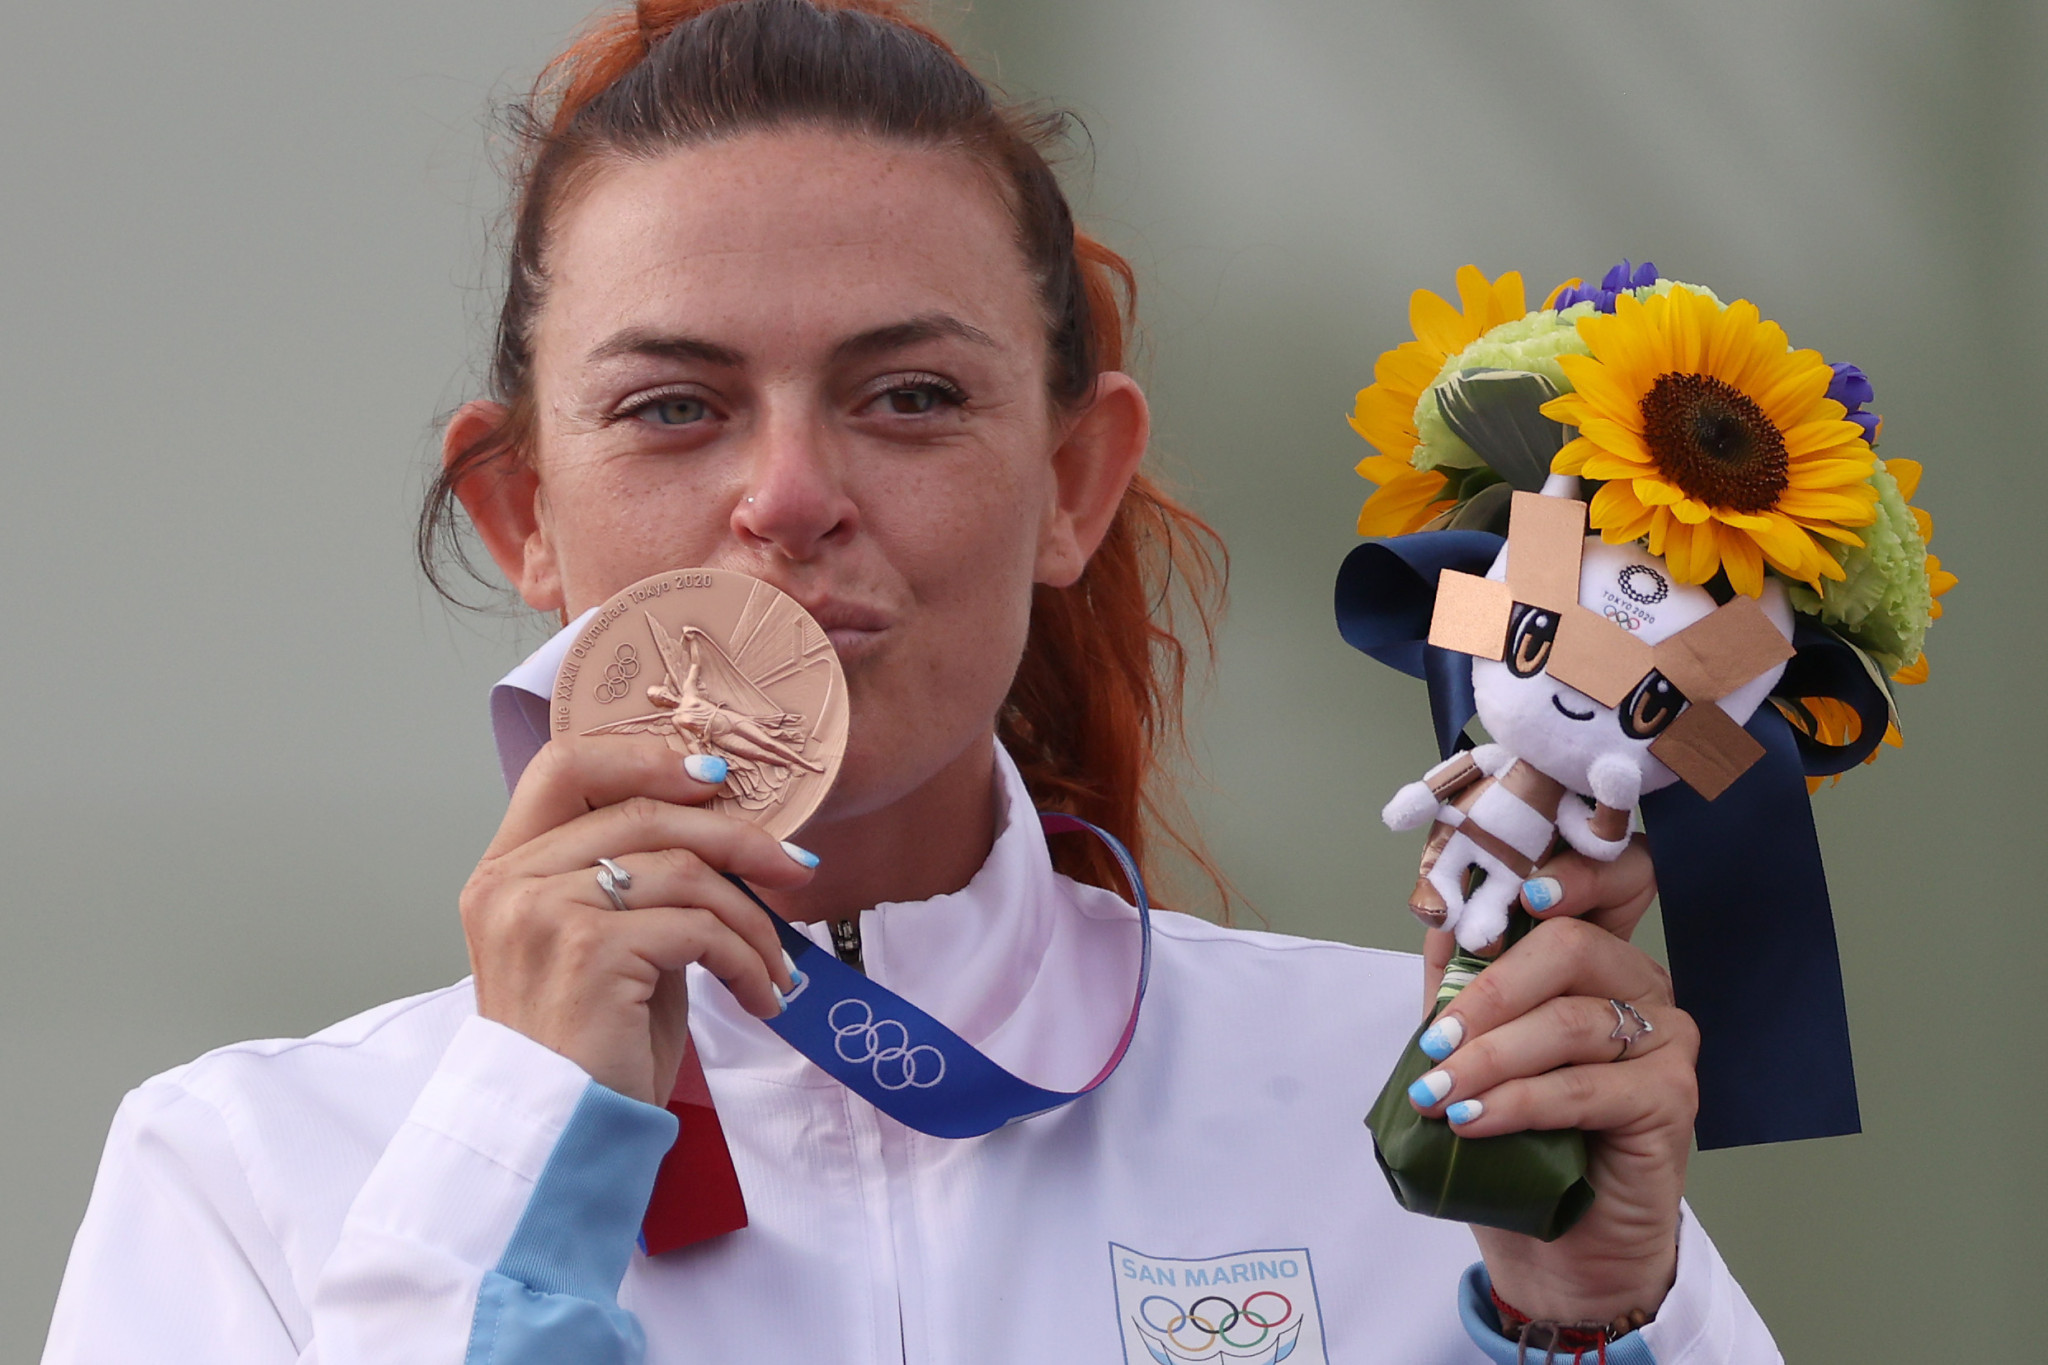 Alessandra Perilli earned a bronze and silver in shooting at Tokyo 2020 as San Marino earned its first-ever Olympic medals ©Getty Images